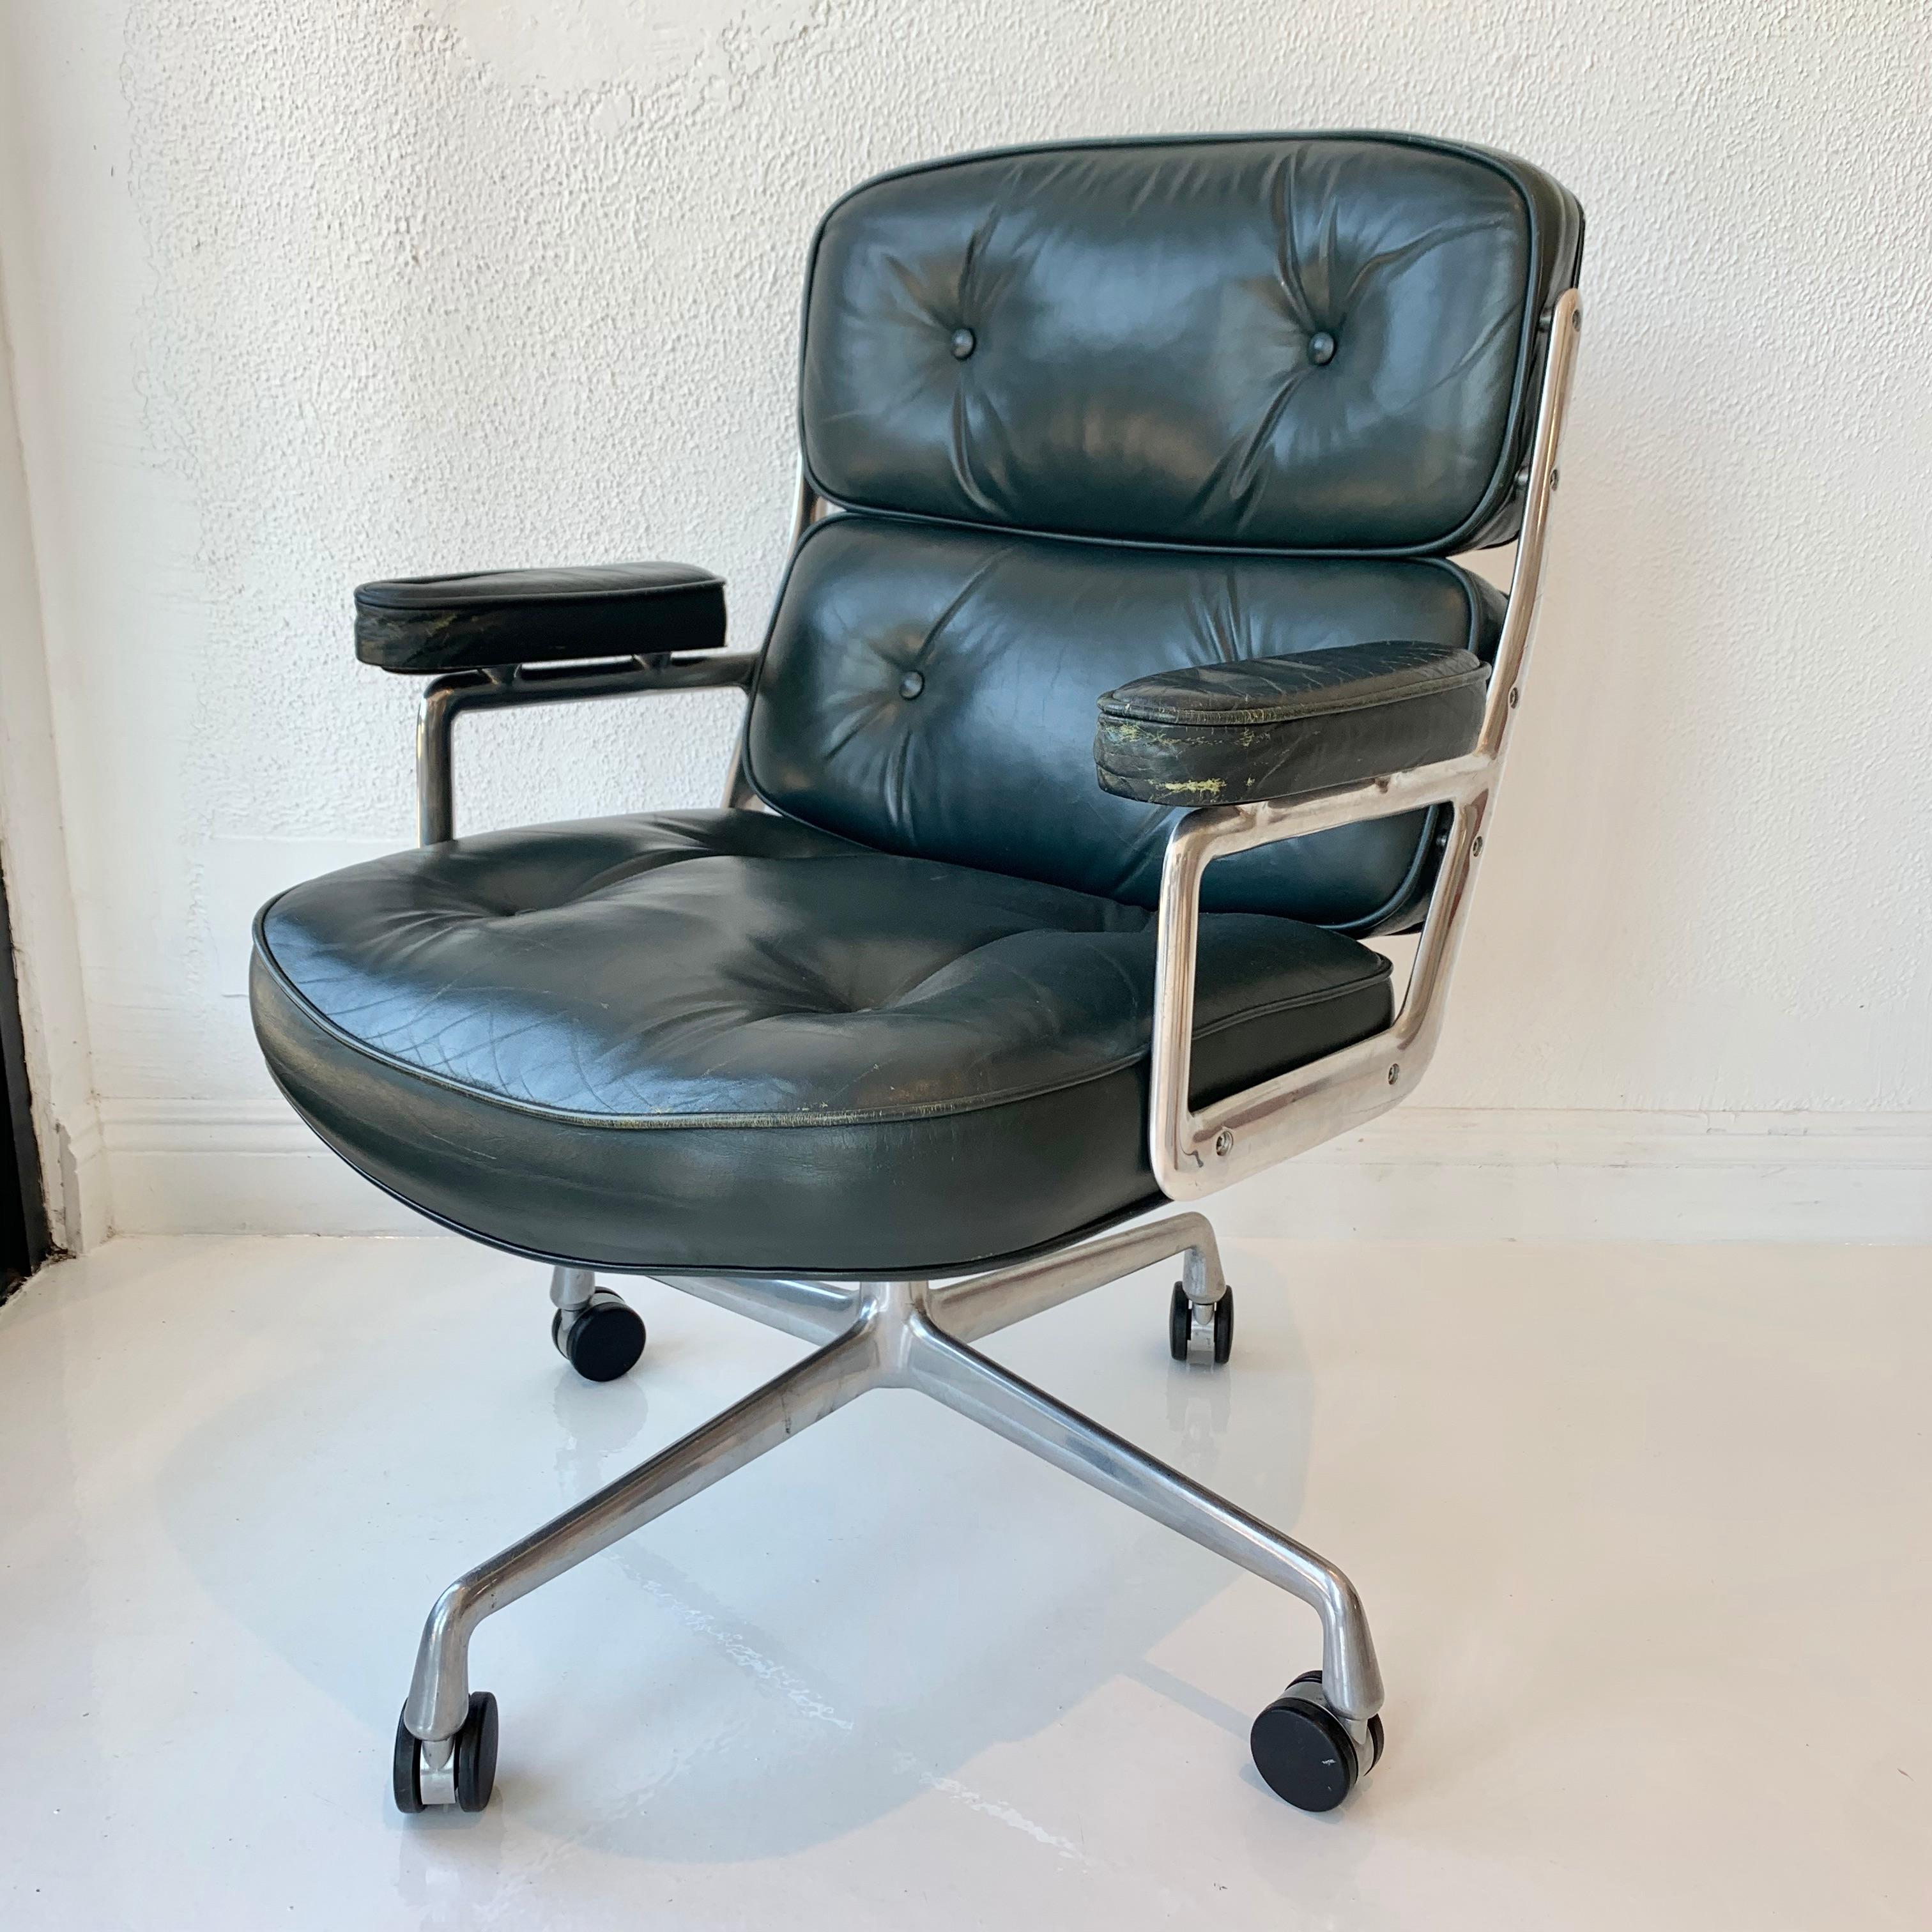 Fantastic set of 6 vintage Eames Time Life swivel chairs in forest green leather. Rare color. Stamped January 18, 1984 on frame. Nickel frame. Swivels and reclines. Great vintage condition to leather. Wear to metal as shown. Height adjustable with